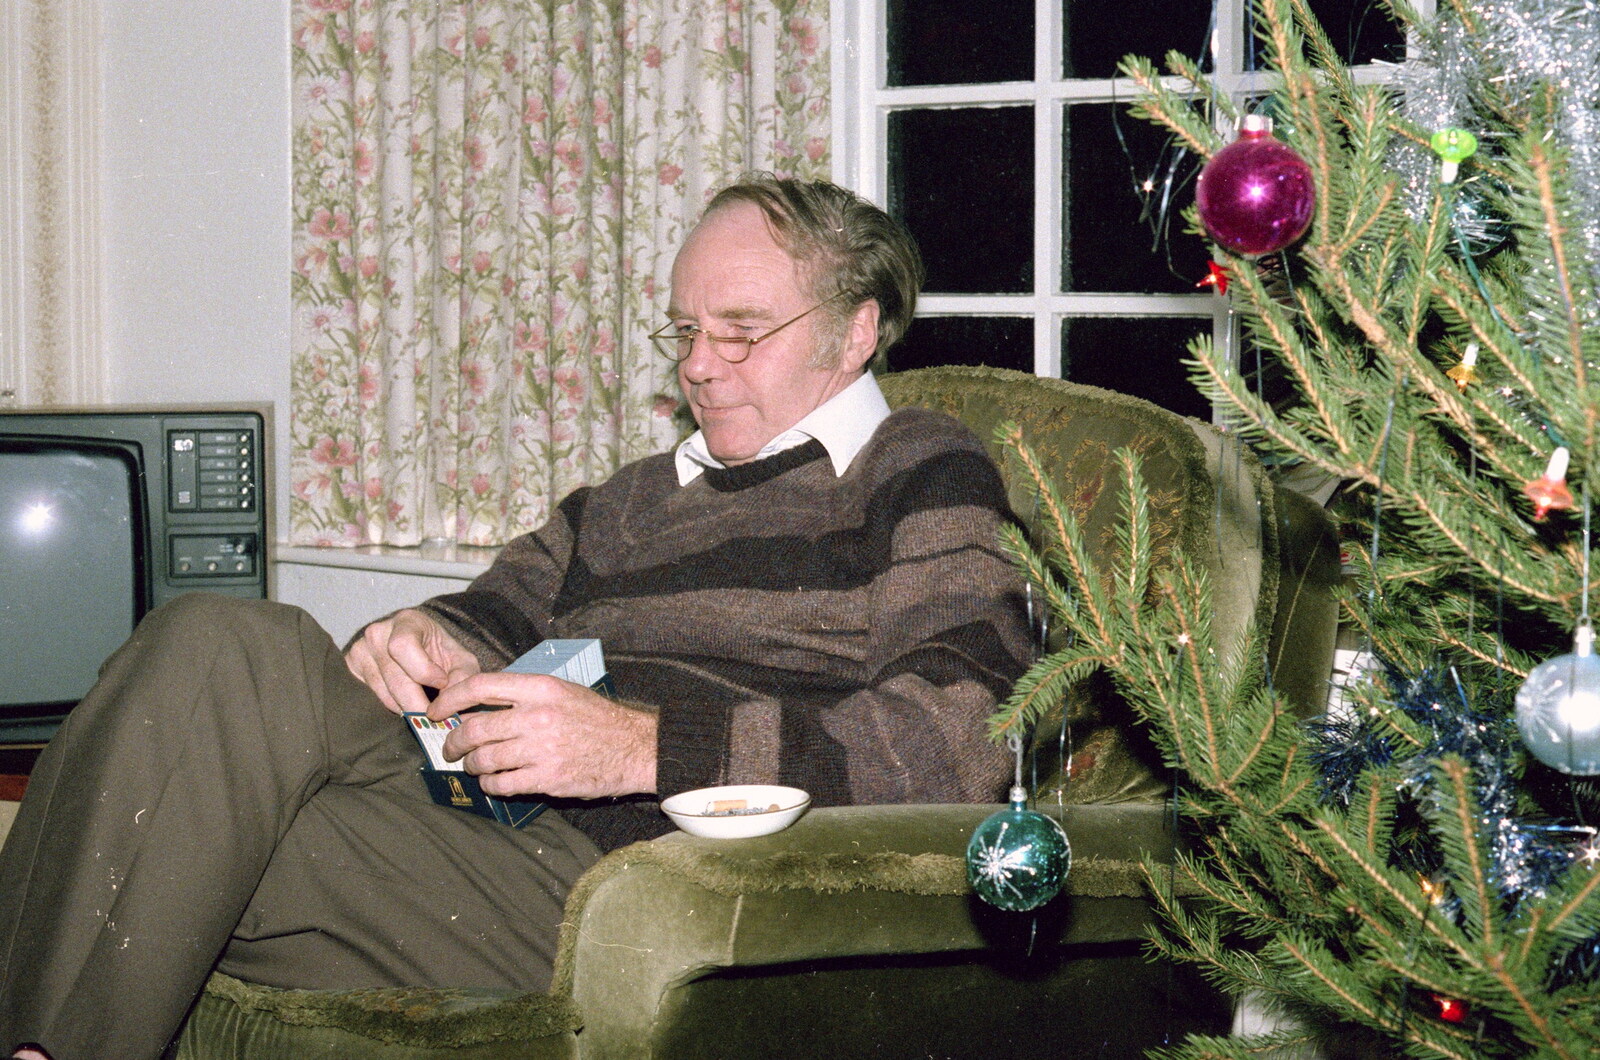 The Old Chap picks a question from Christmas in Macclesfield and Wetherby, Cheshire  and Yorkshire - 25th December 1985